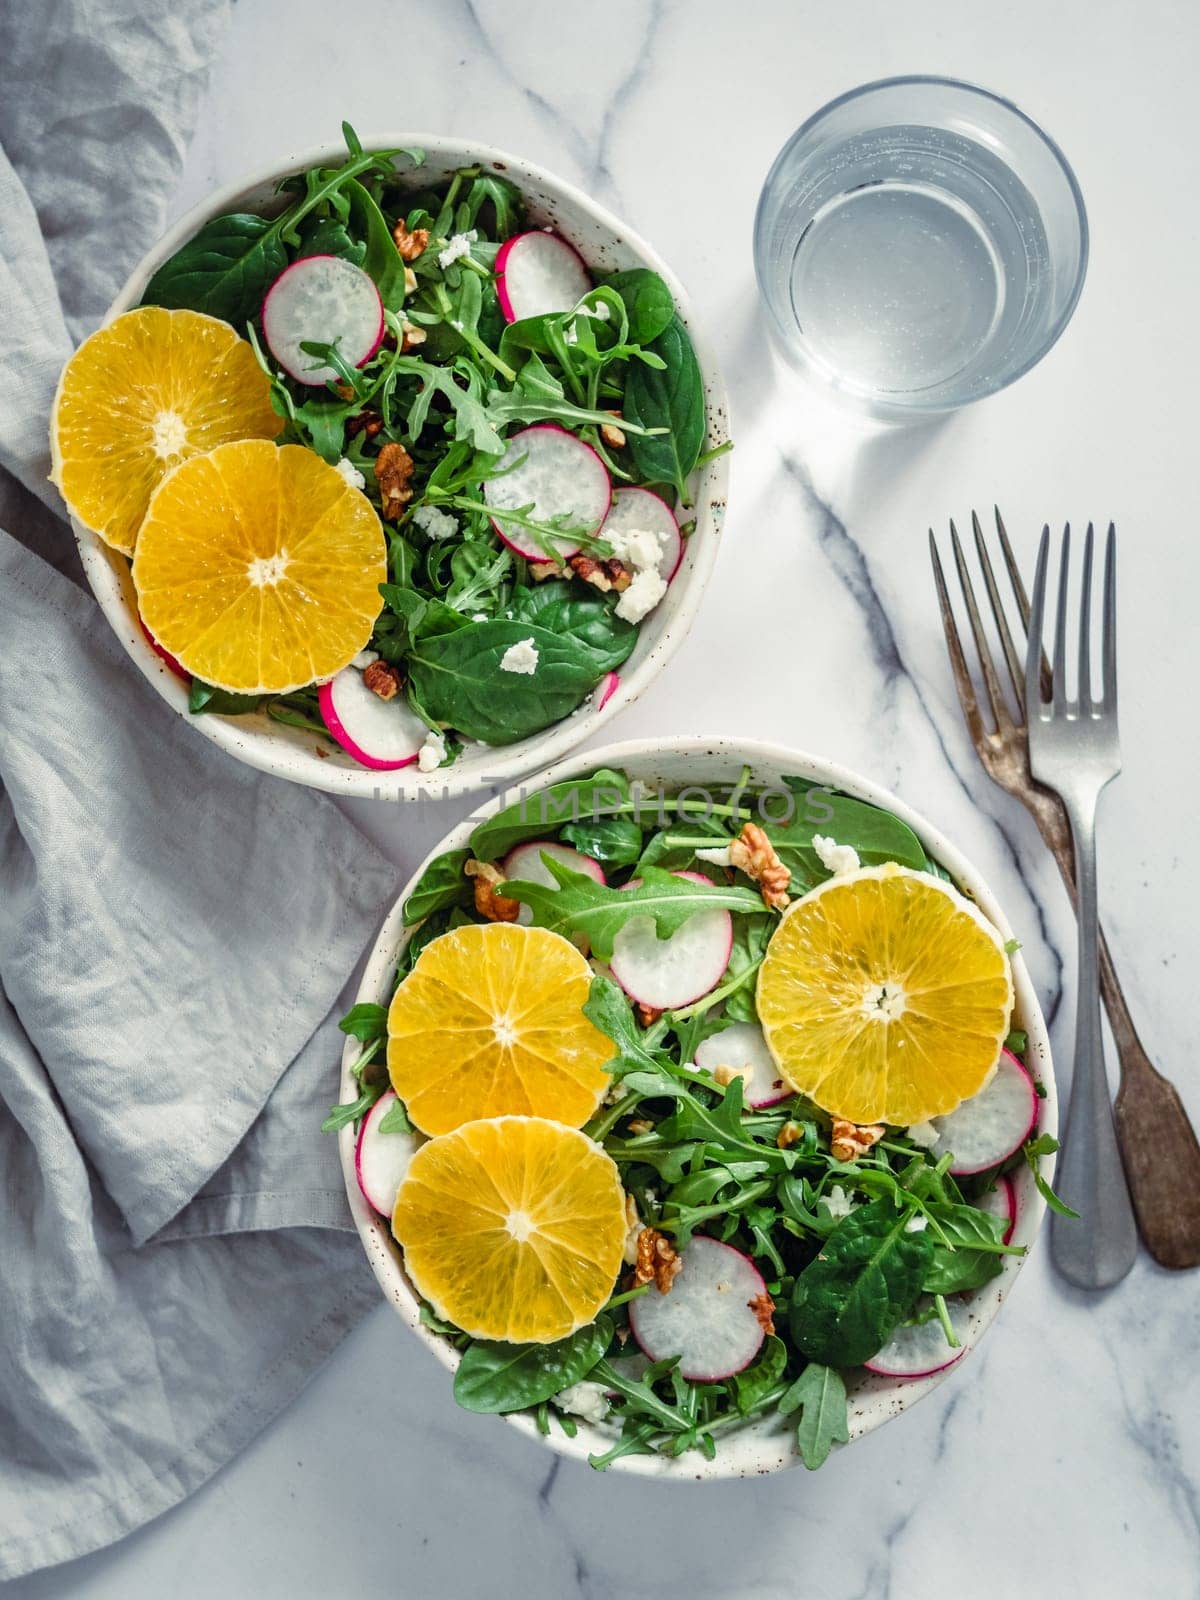 Vegan salad bowl with oranges, spinach, arugula, radish, nut. Top view. Vegan breakfast, vegetarian food, diet concept. Two bowls with salad on white marble tabletop. Vertical